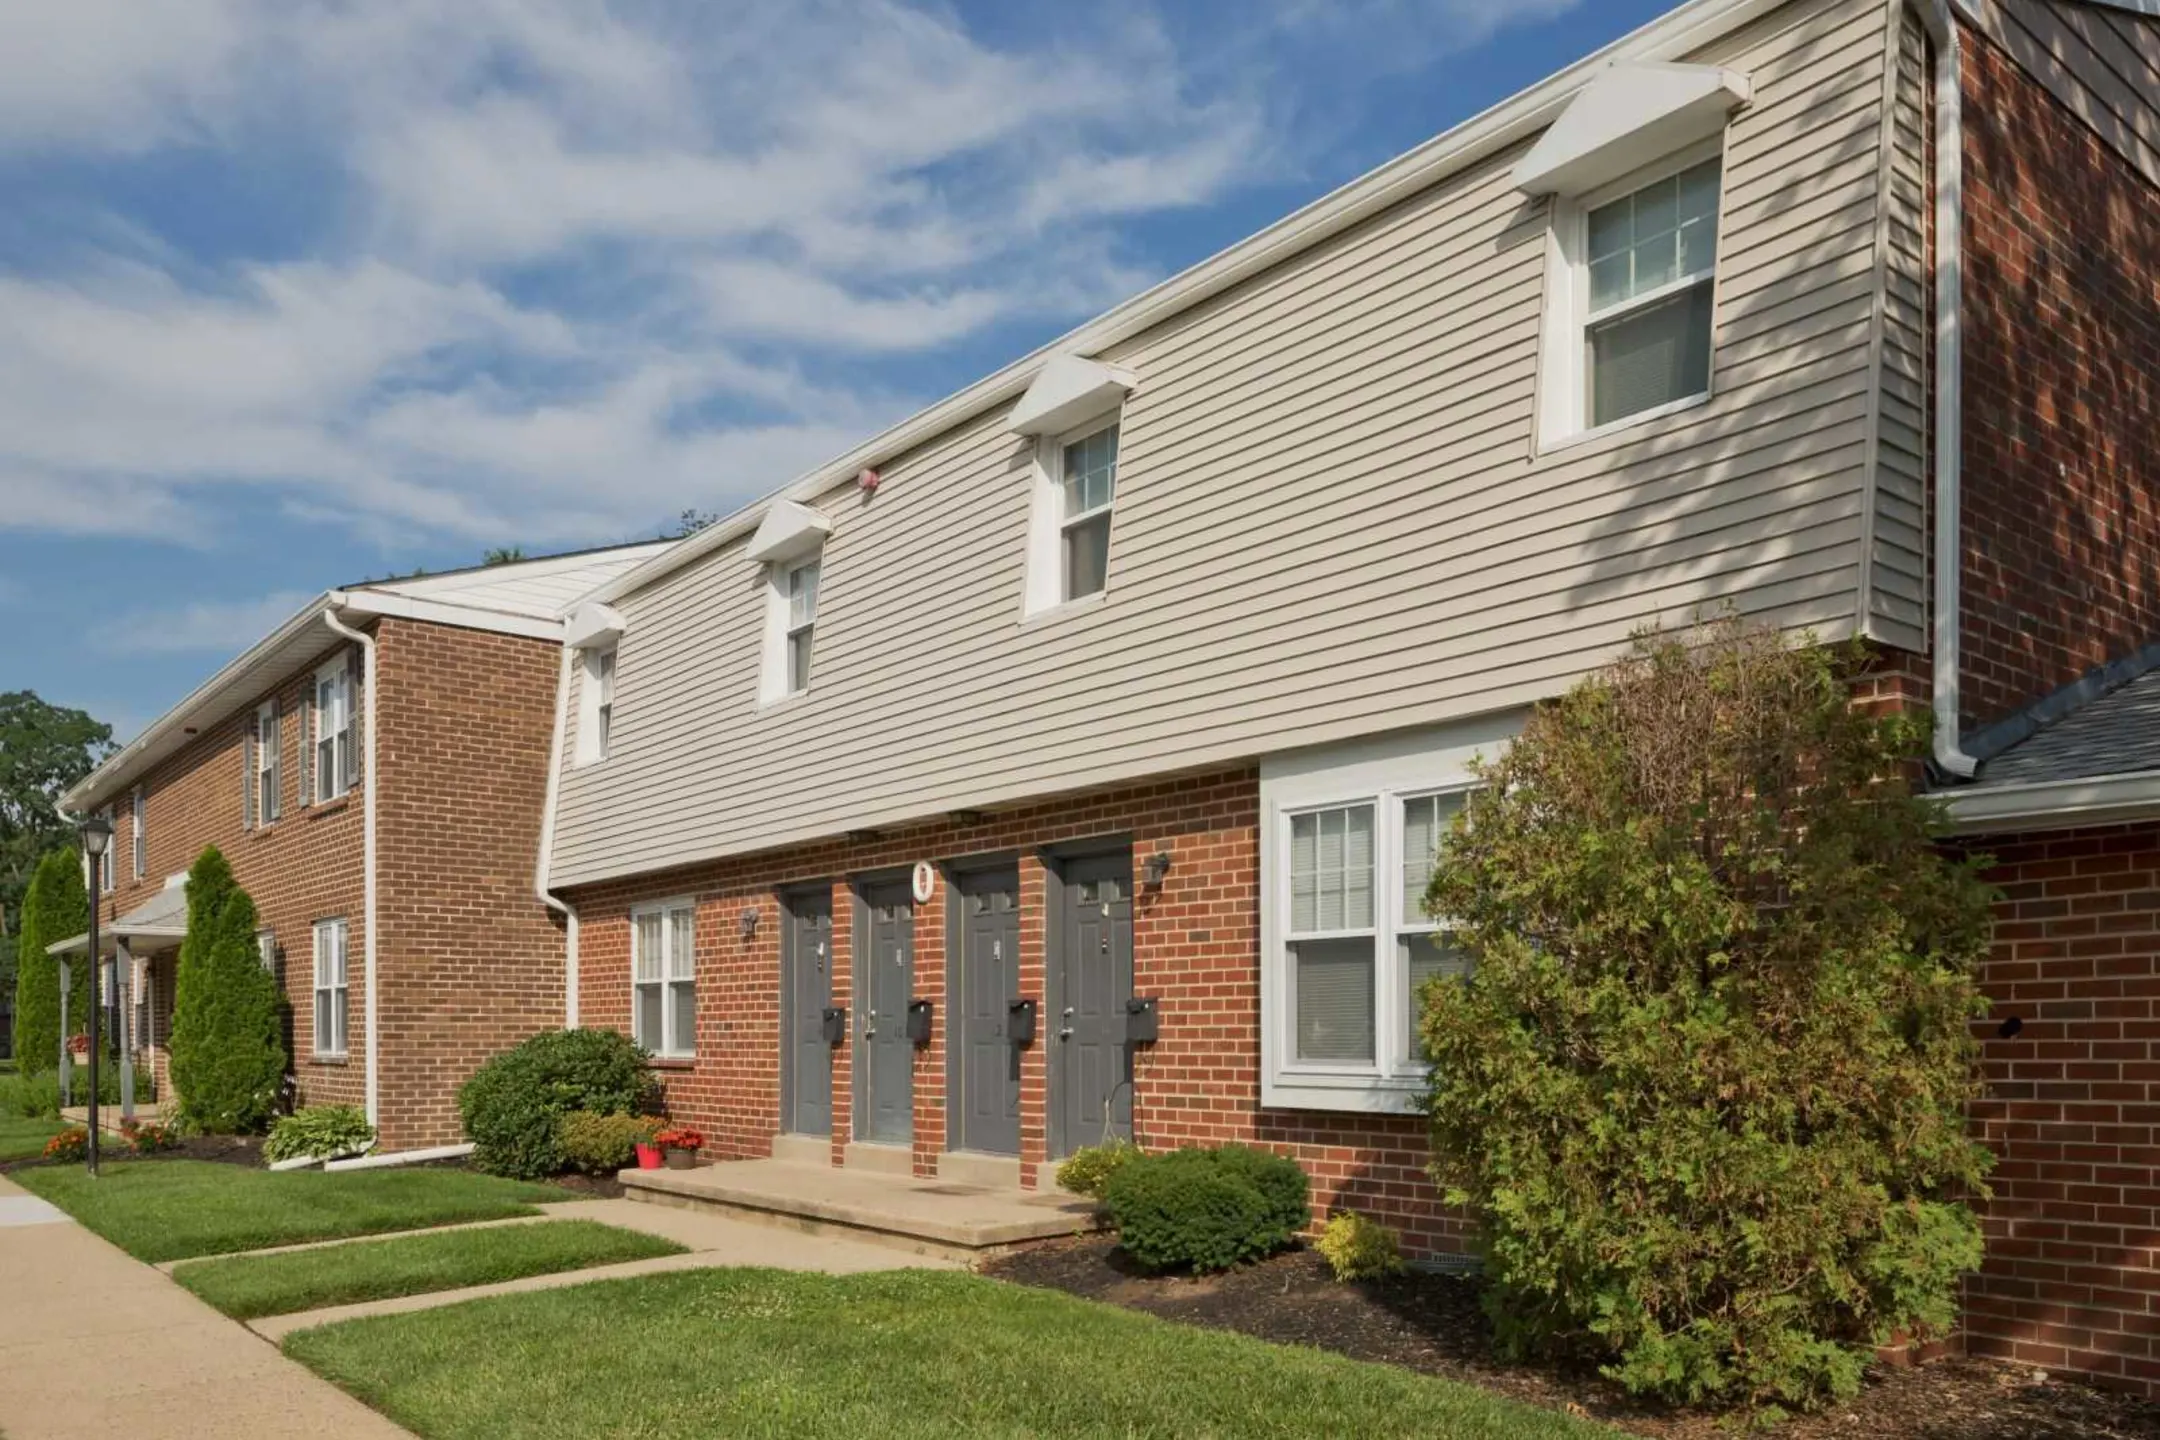 Building - Pickwick Apartments - Maple Shade, NJ